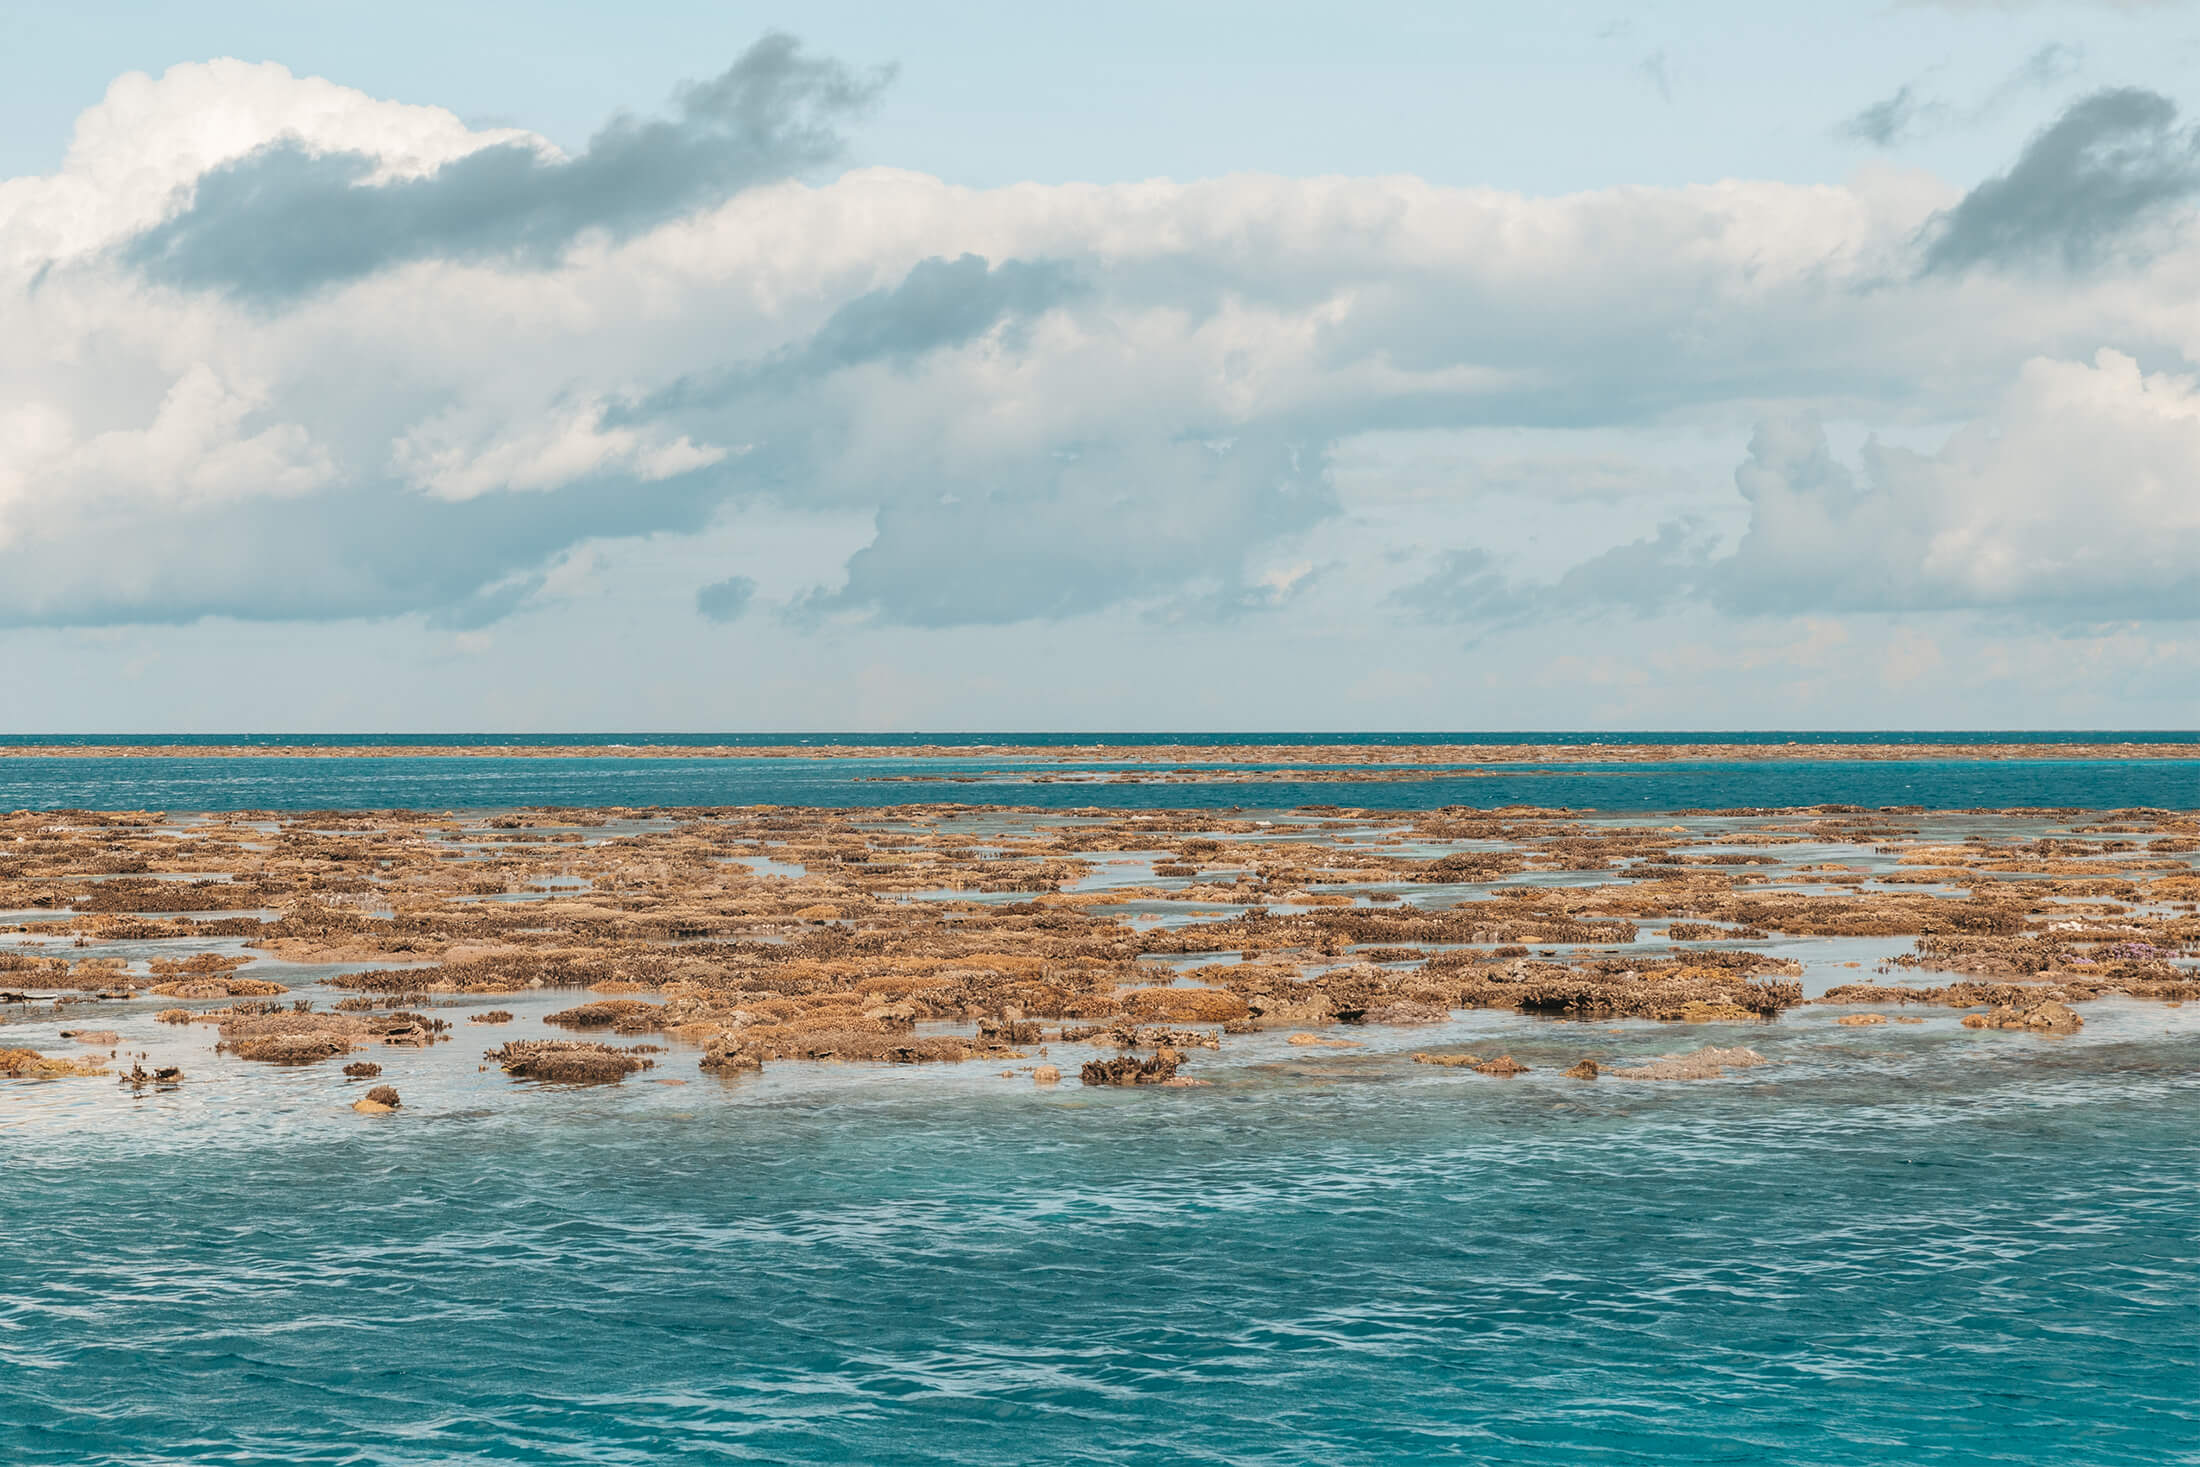 Great Barrier Reef exposed at low tide